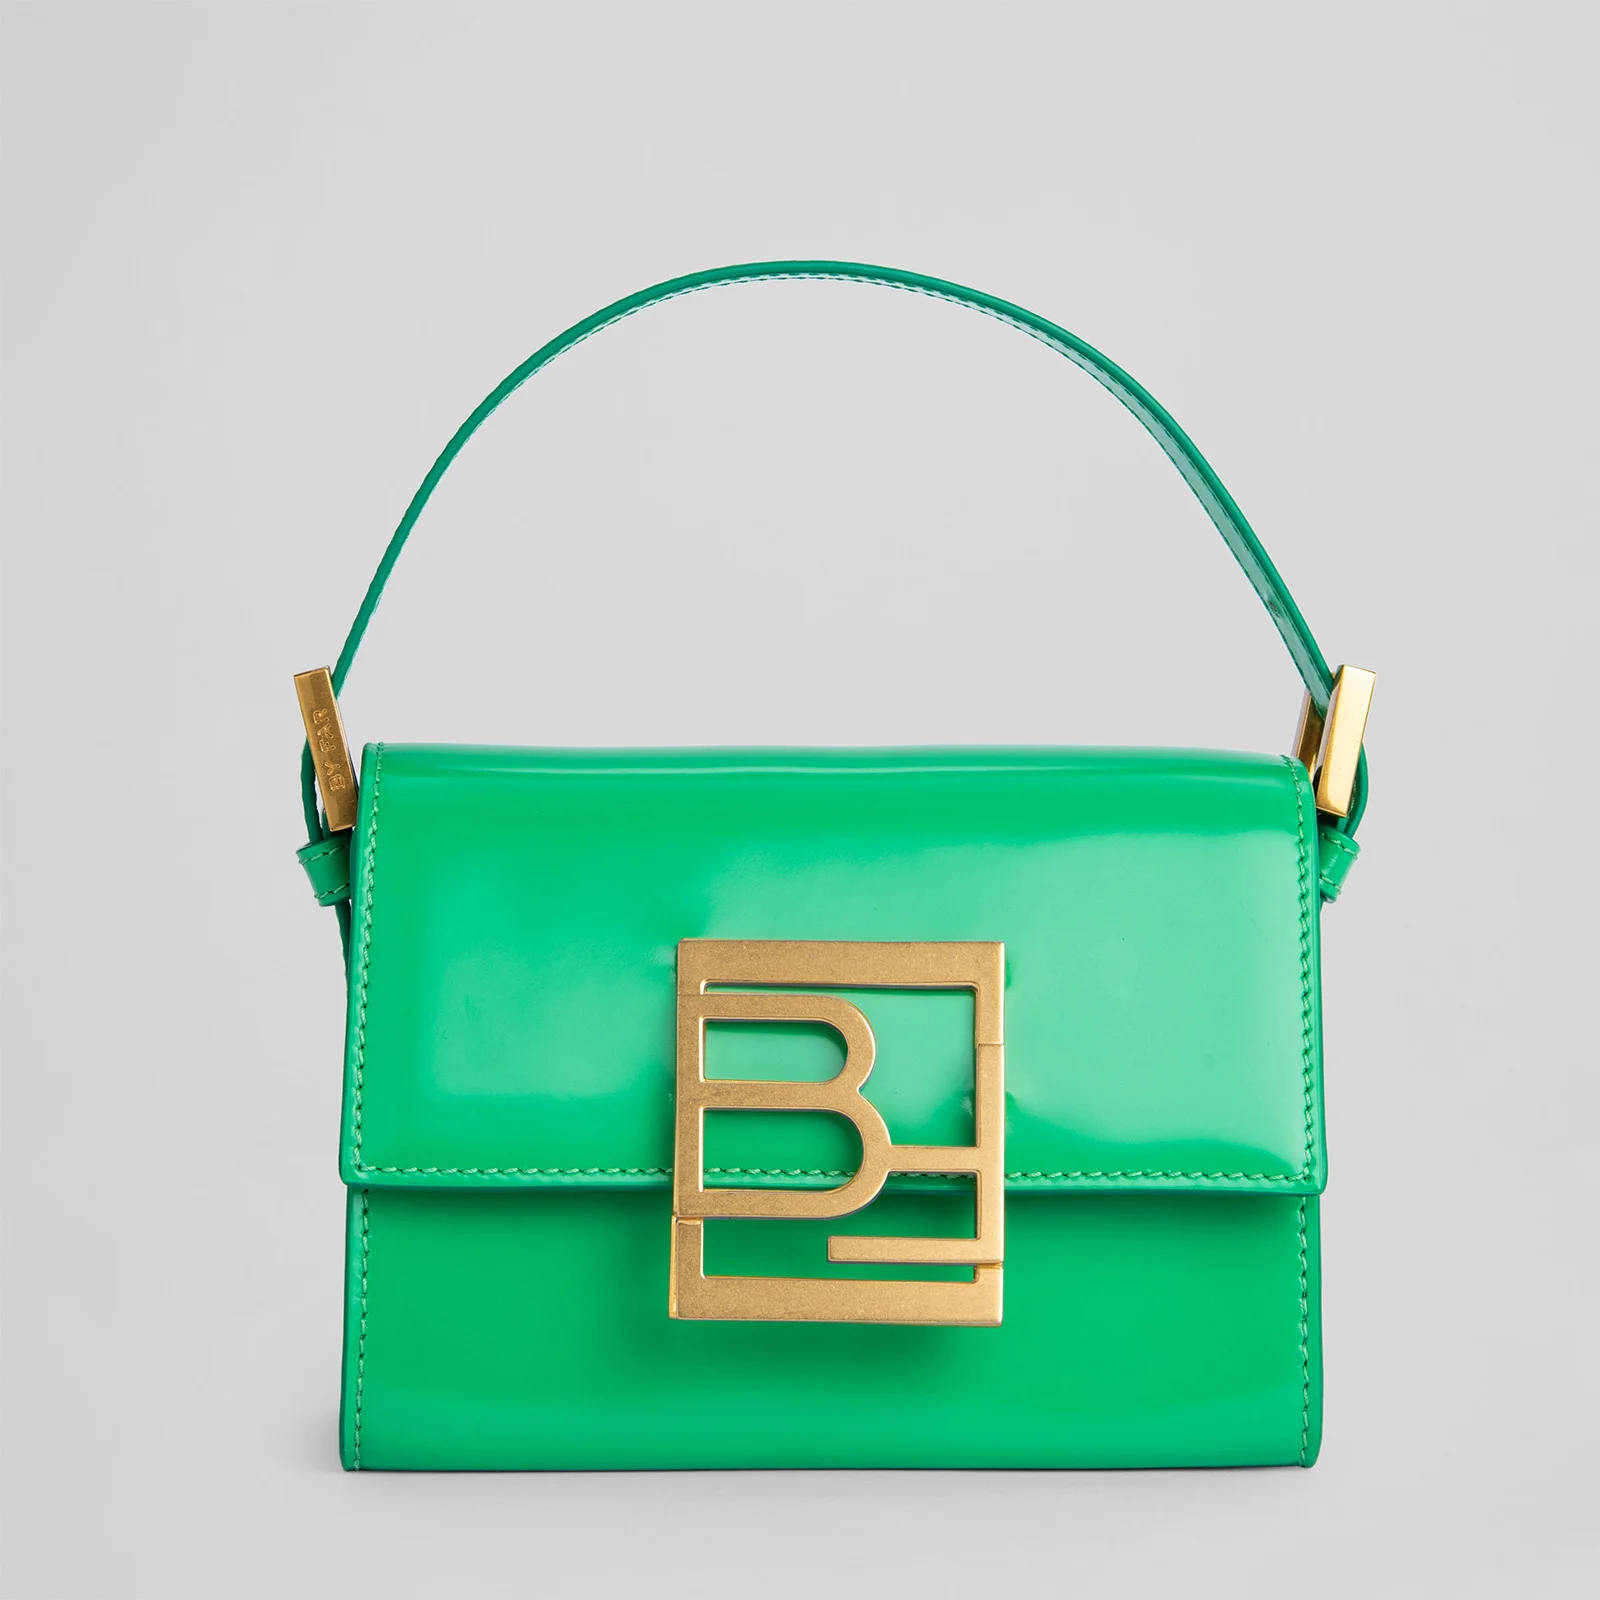 BY FAR Women's Fran Semi Patent Leather Bag - Super Green Image 1